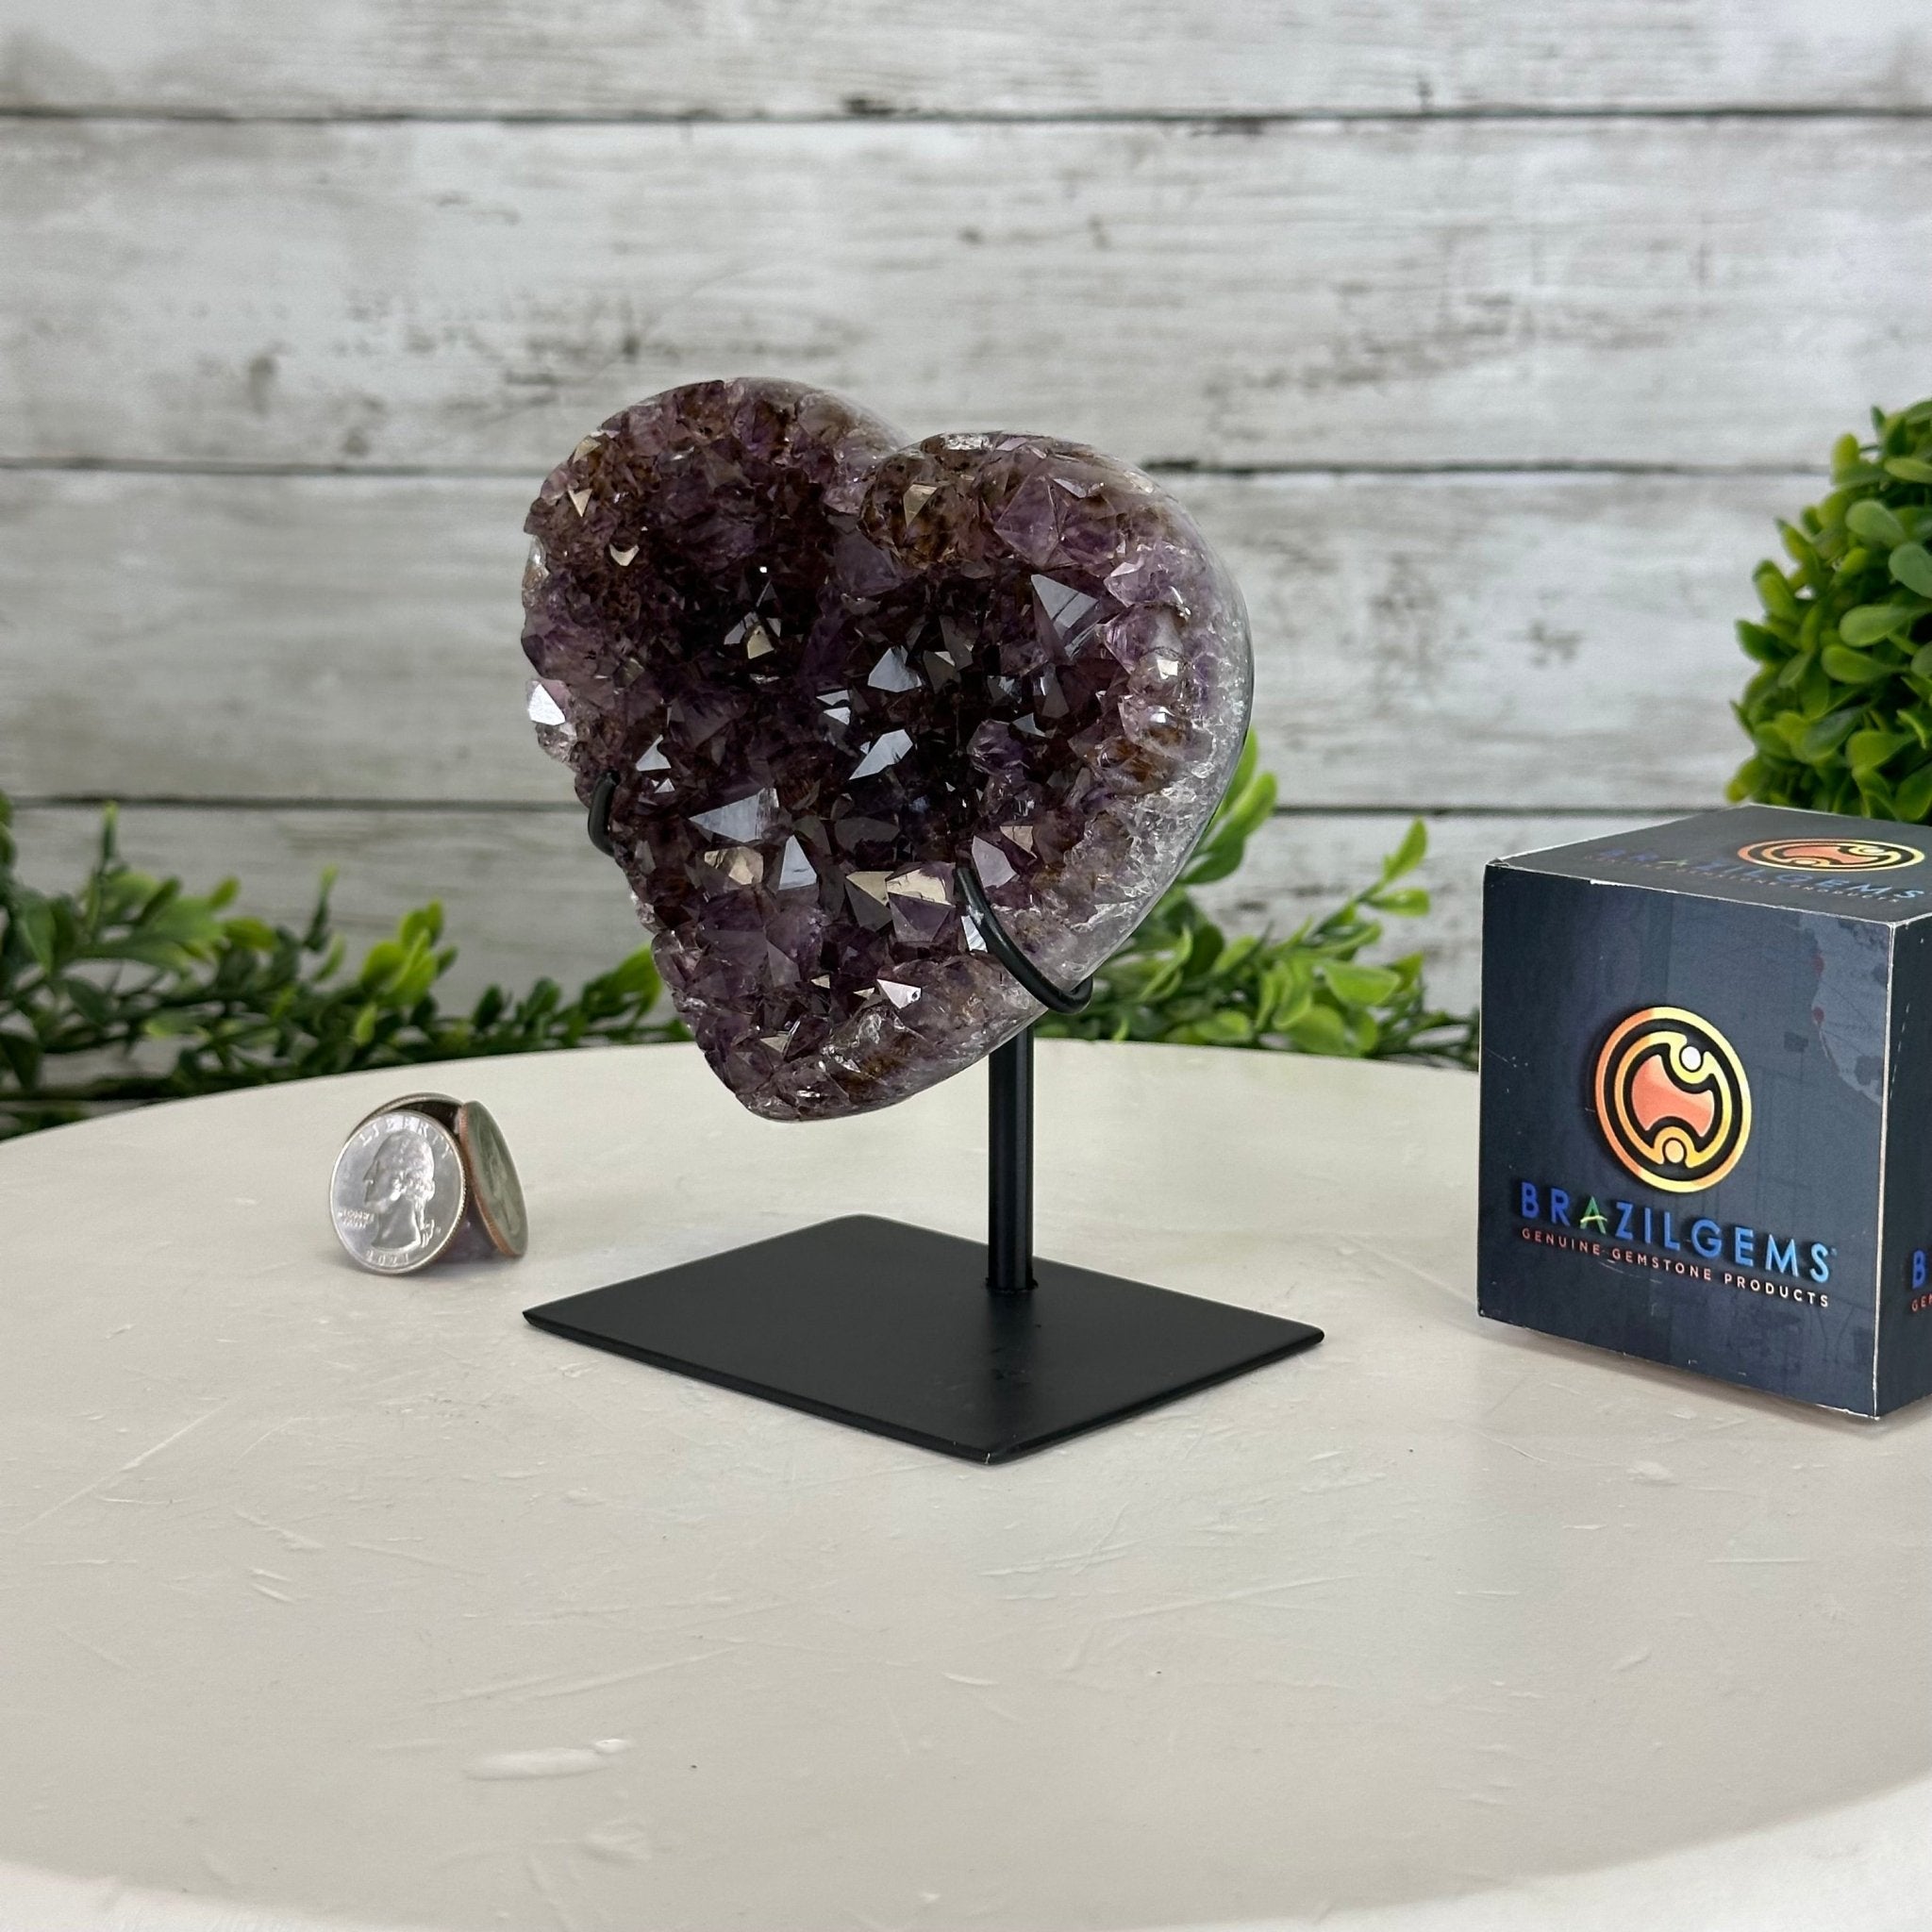 Extra Quality Amethyst Heart Geode w/ metal stand, 1.3 lbs & 5.2" Tall #5463-0298 - Brazil GemsBrazil GemsExtra Quality Amethyst Heart Geode w/ metal stand, 1.3 lbs & 5.2" Tall #5463-0298Hearts5463-0298